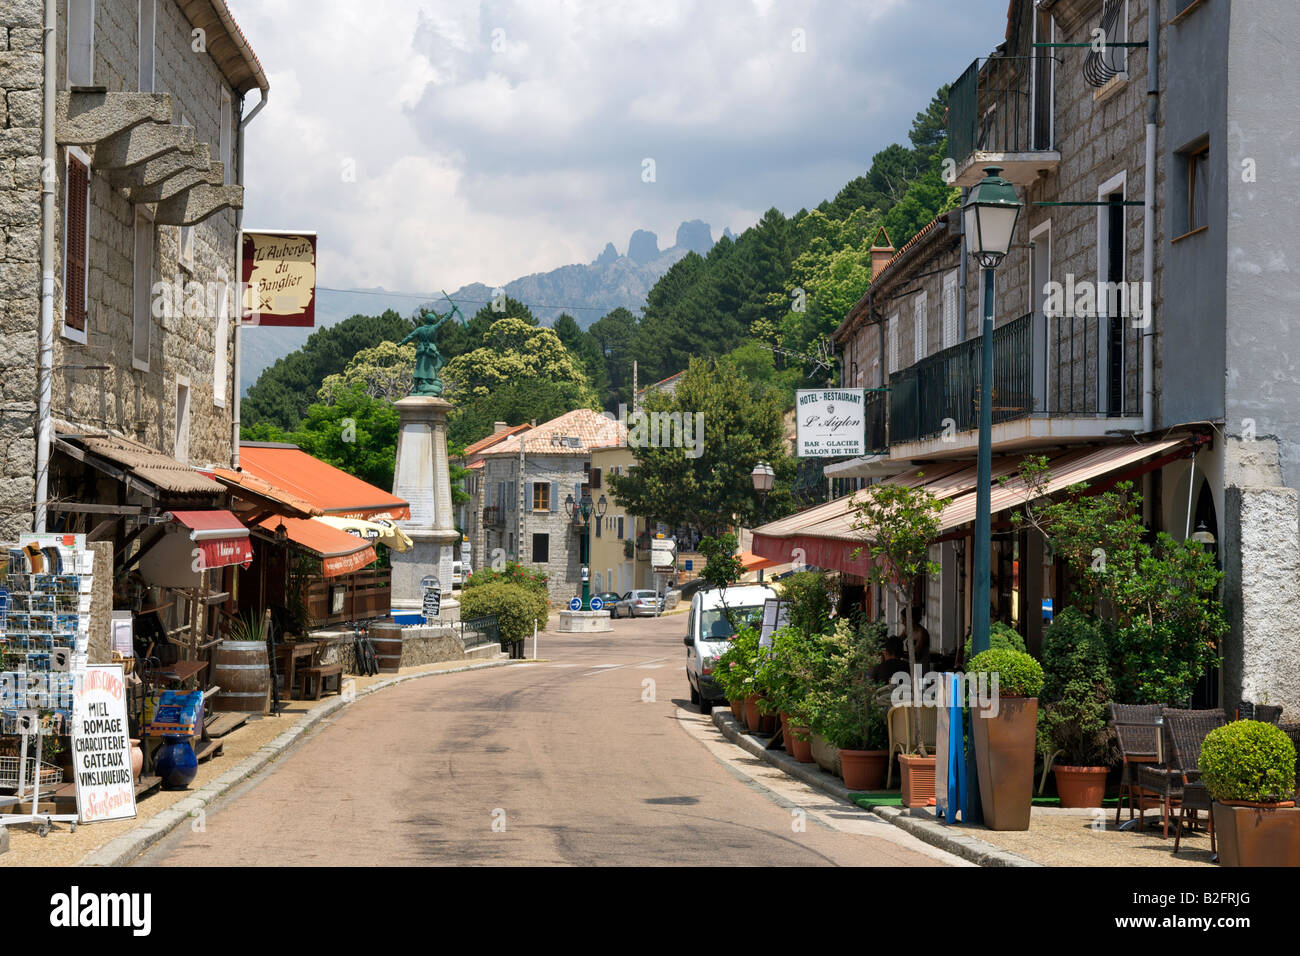 The town of Zonza in southeast Corsica. Stock Photo